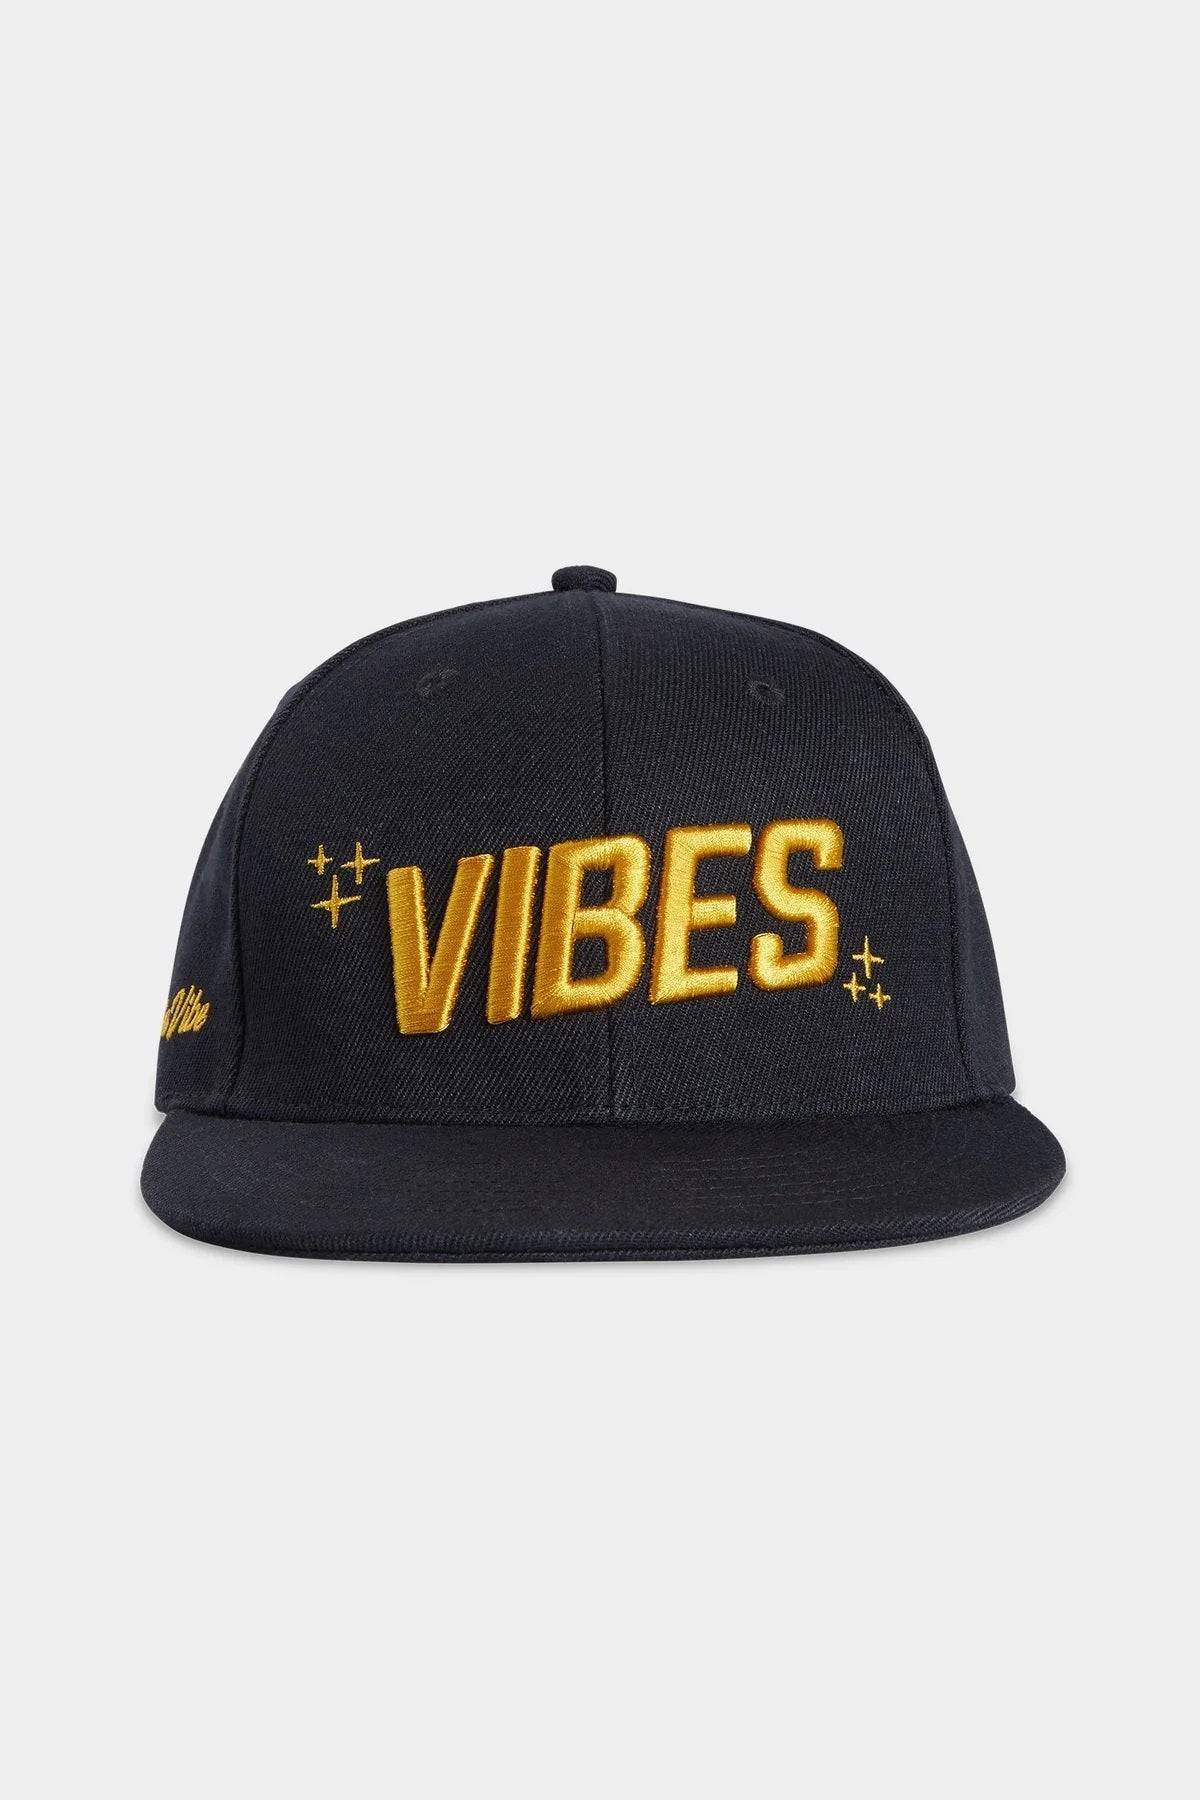 VIBES Black Snap Back Hat With Gold Logo